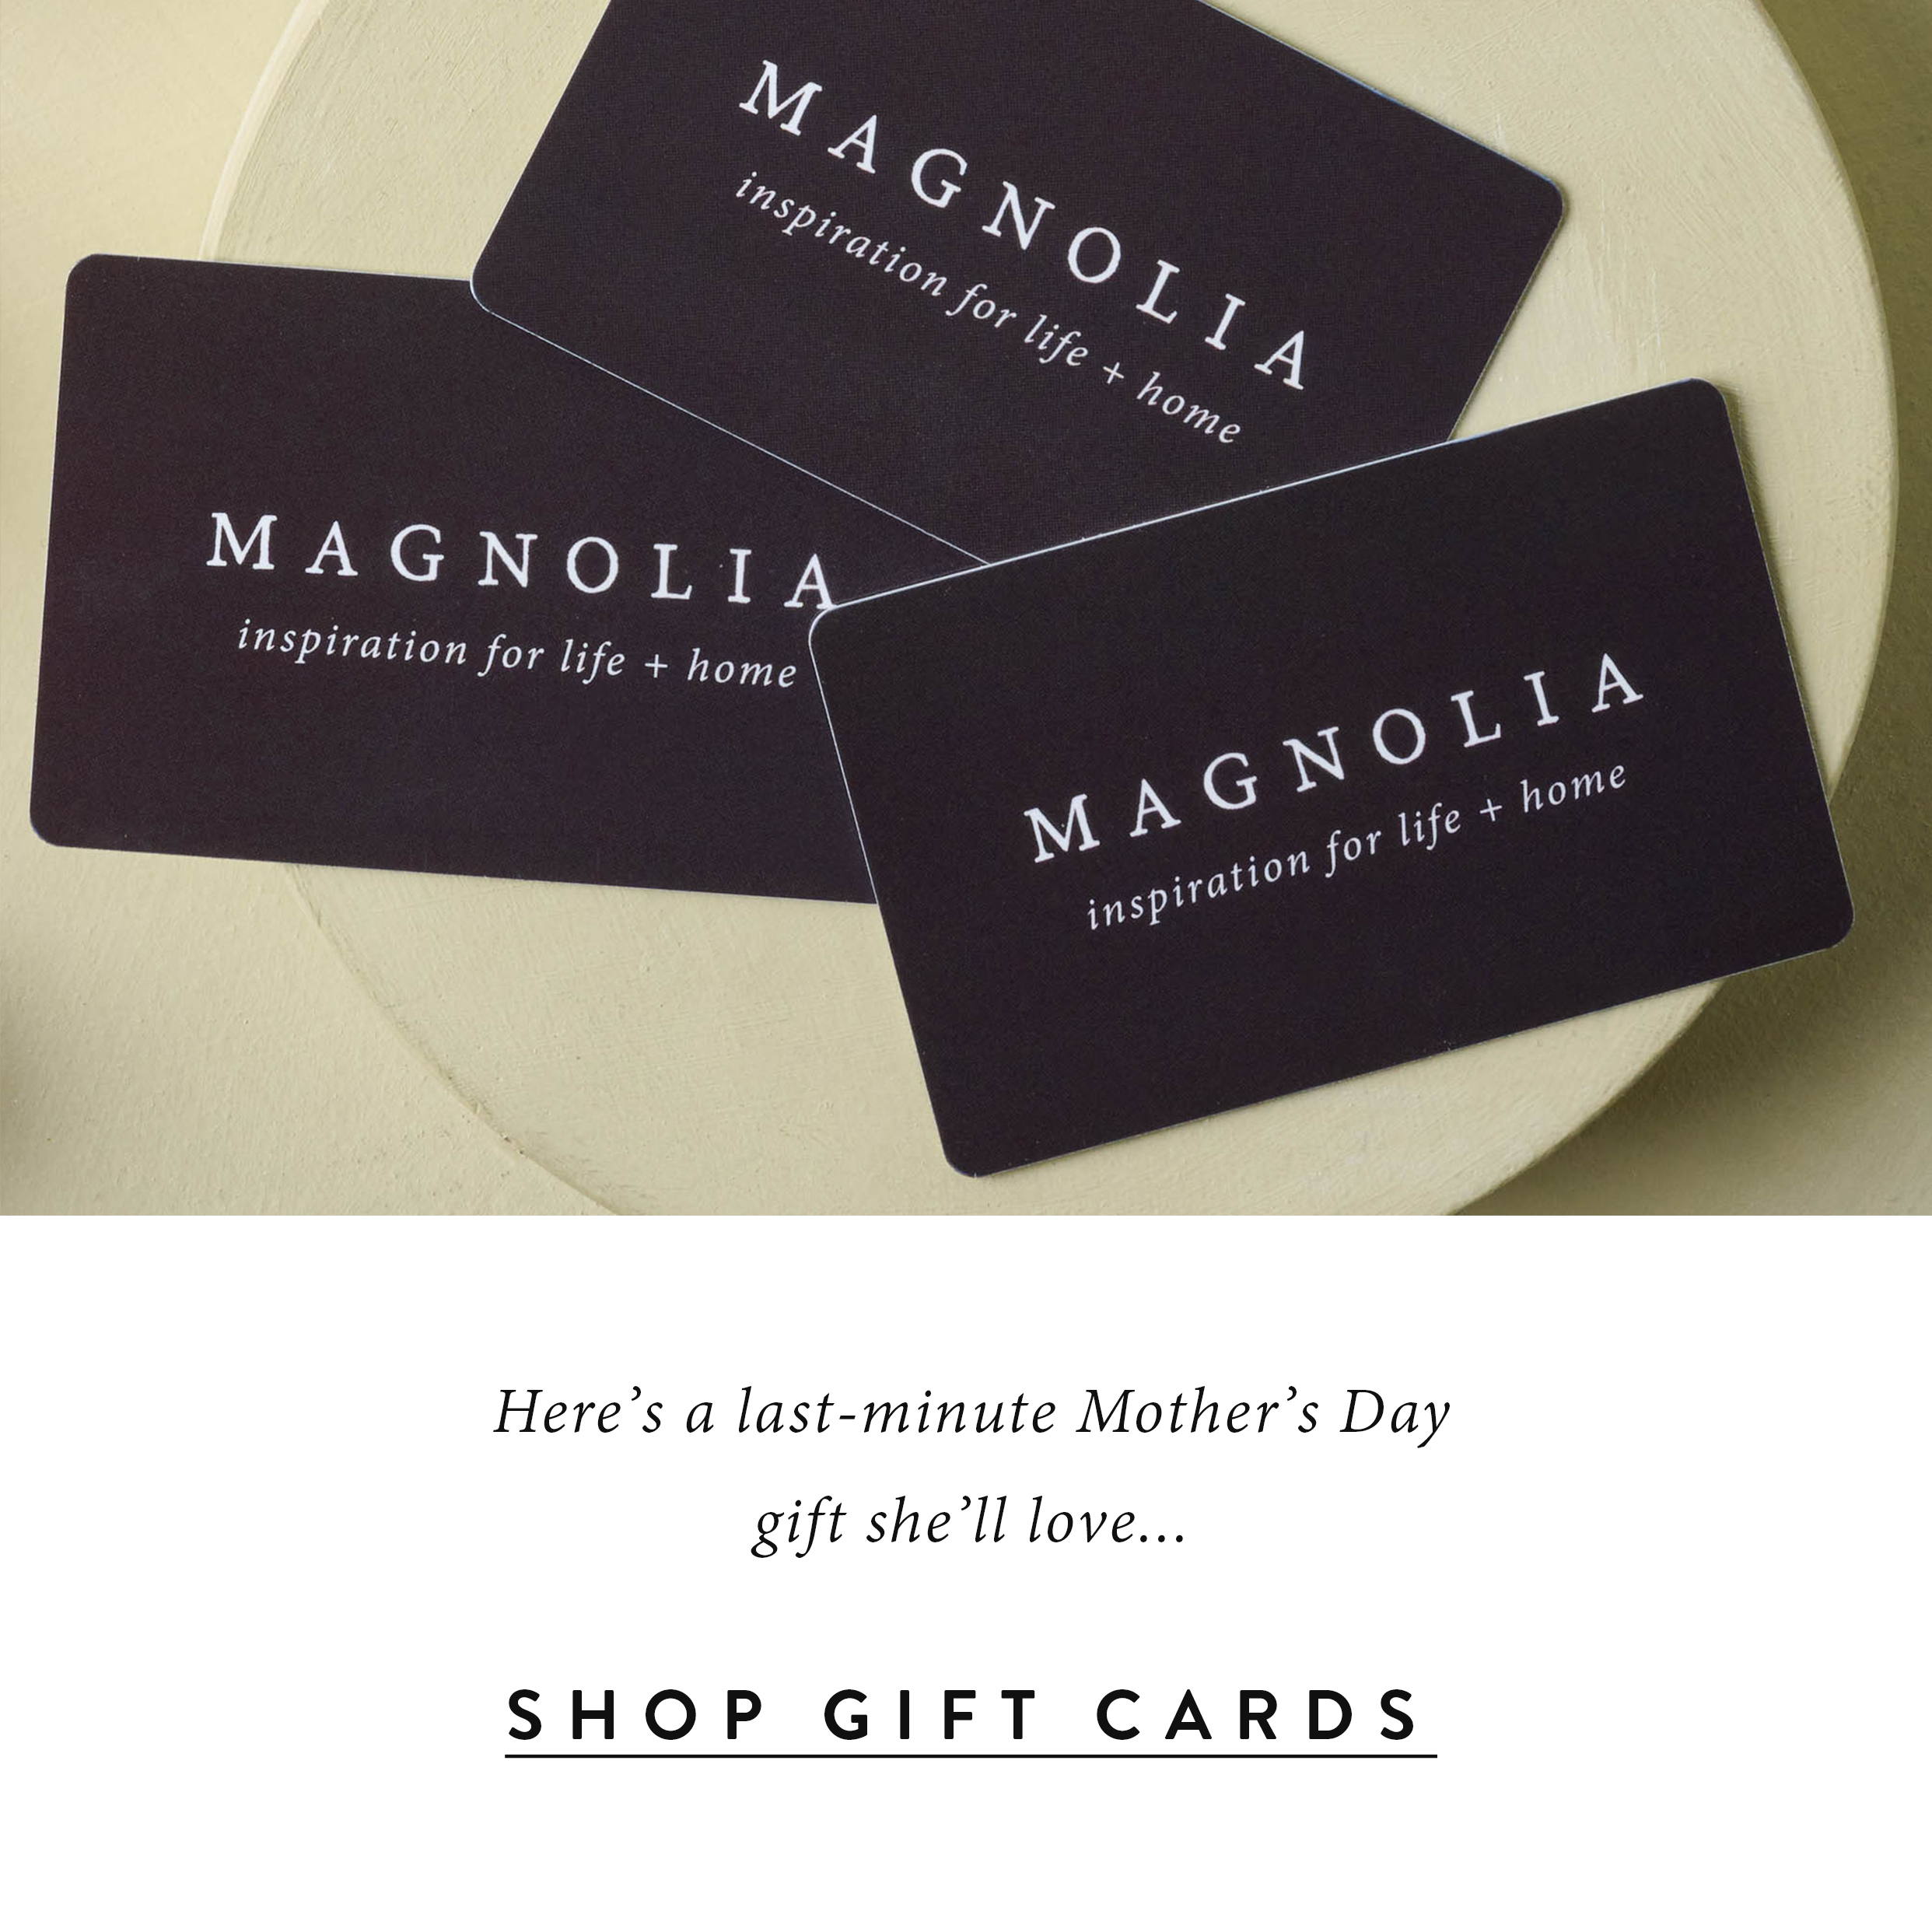 Here's a last-minute Mother's Day gift she'll love.  shop gift cards.